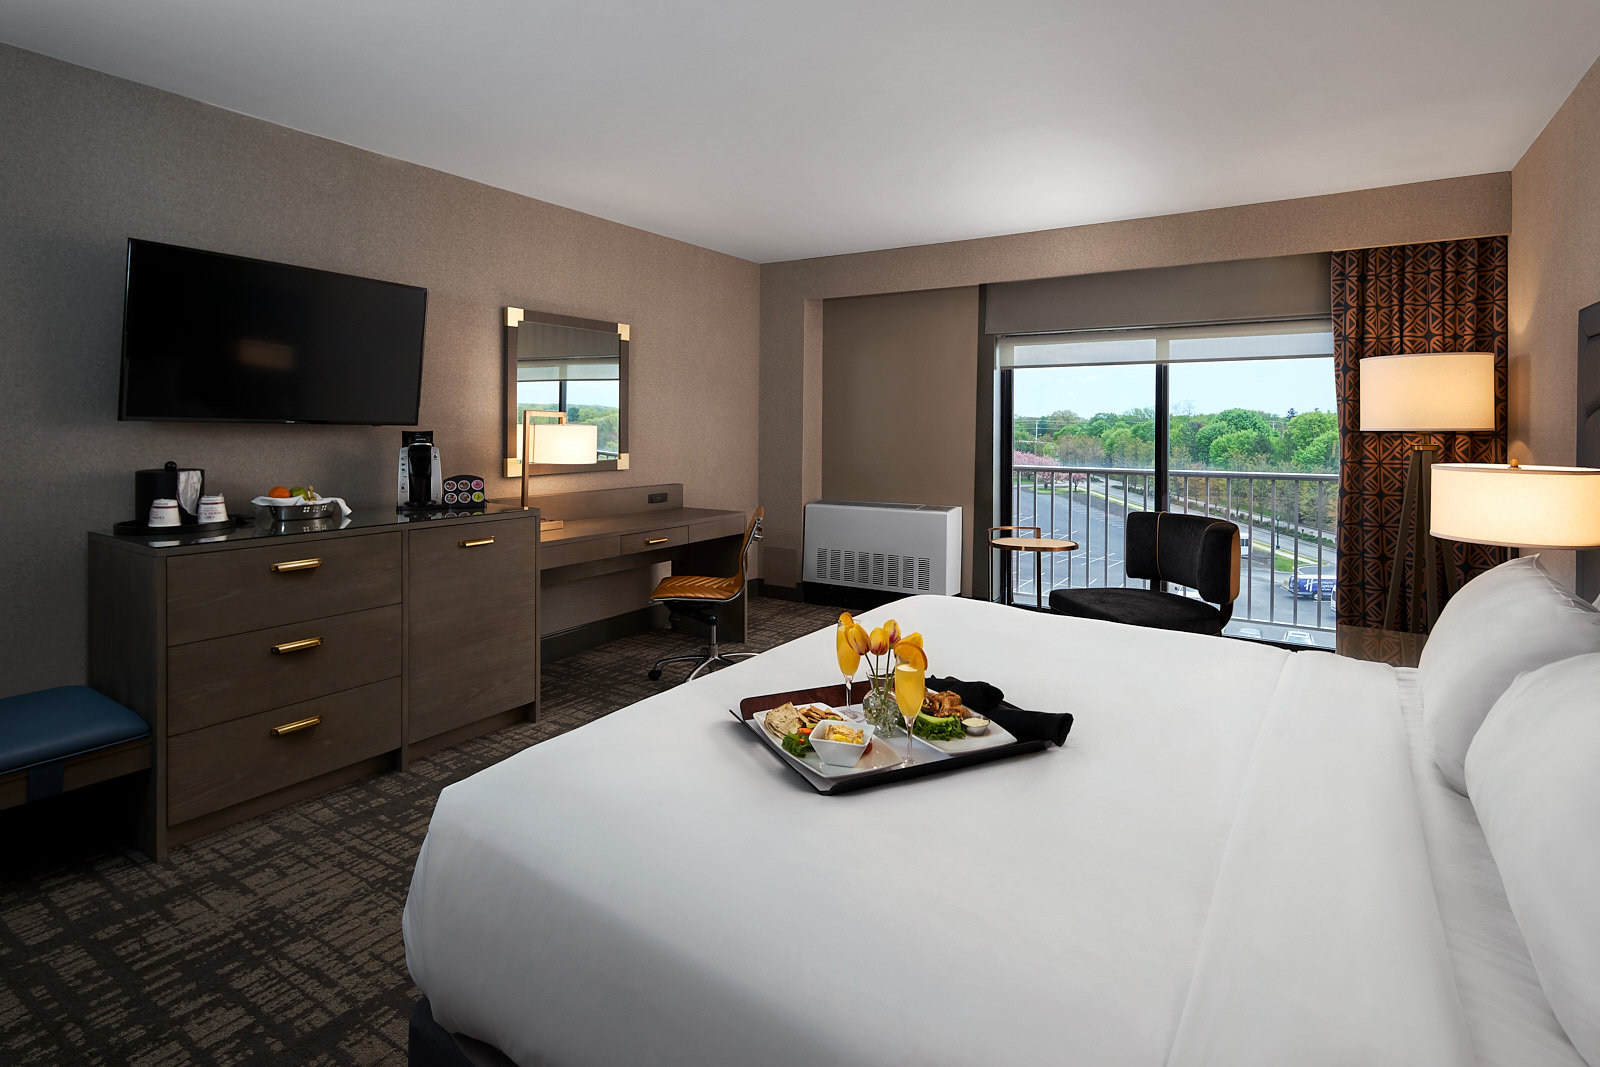 Enjoy your breakfast in our king-sized guest room.